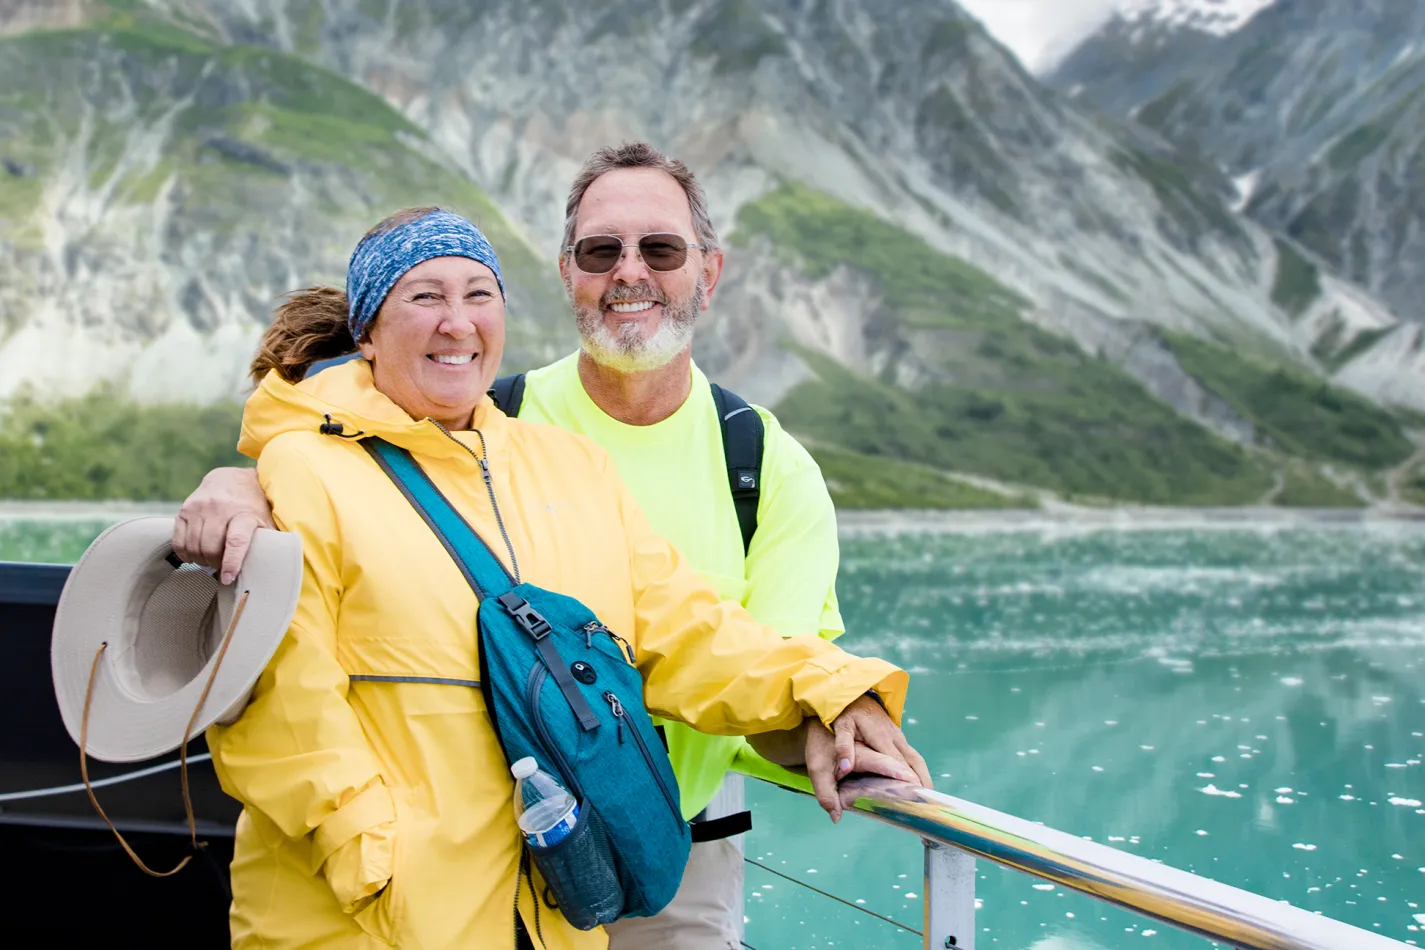 Tracy Arm Inlet